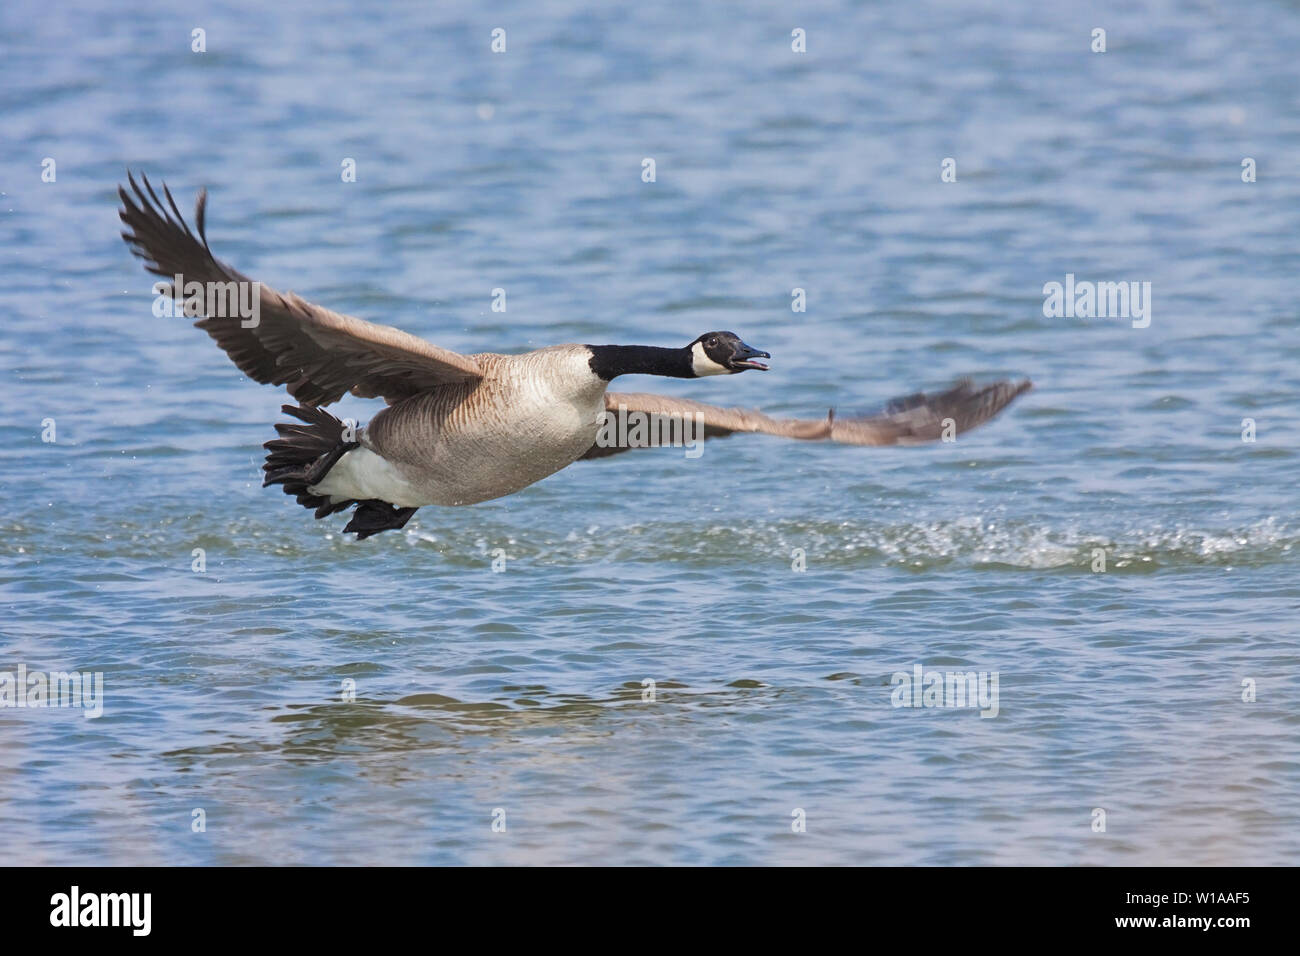 A canada goose lifts off from a lake. Wings flapping, feet up, neck stretched the goose is barely off the rippling water. Stock Photo